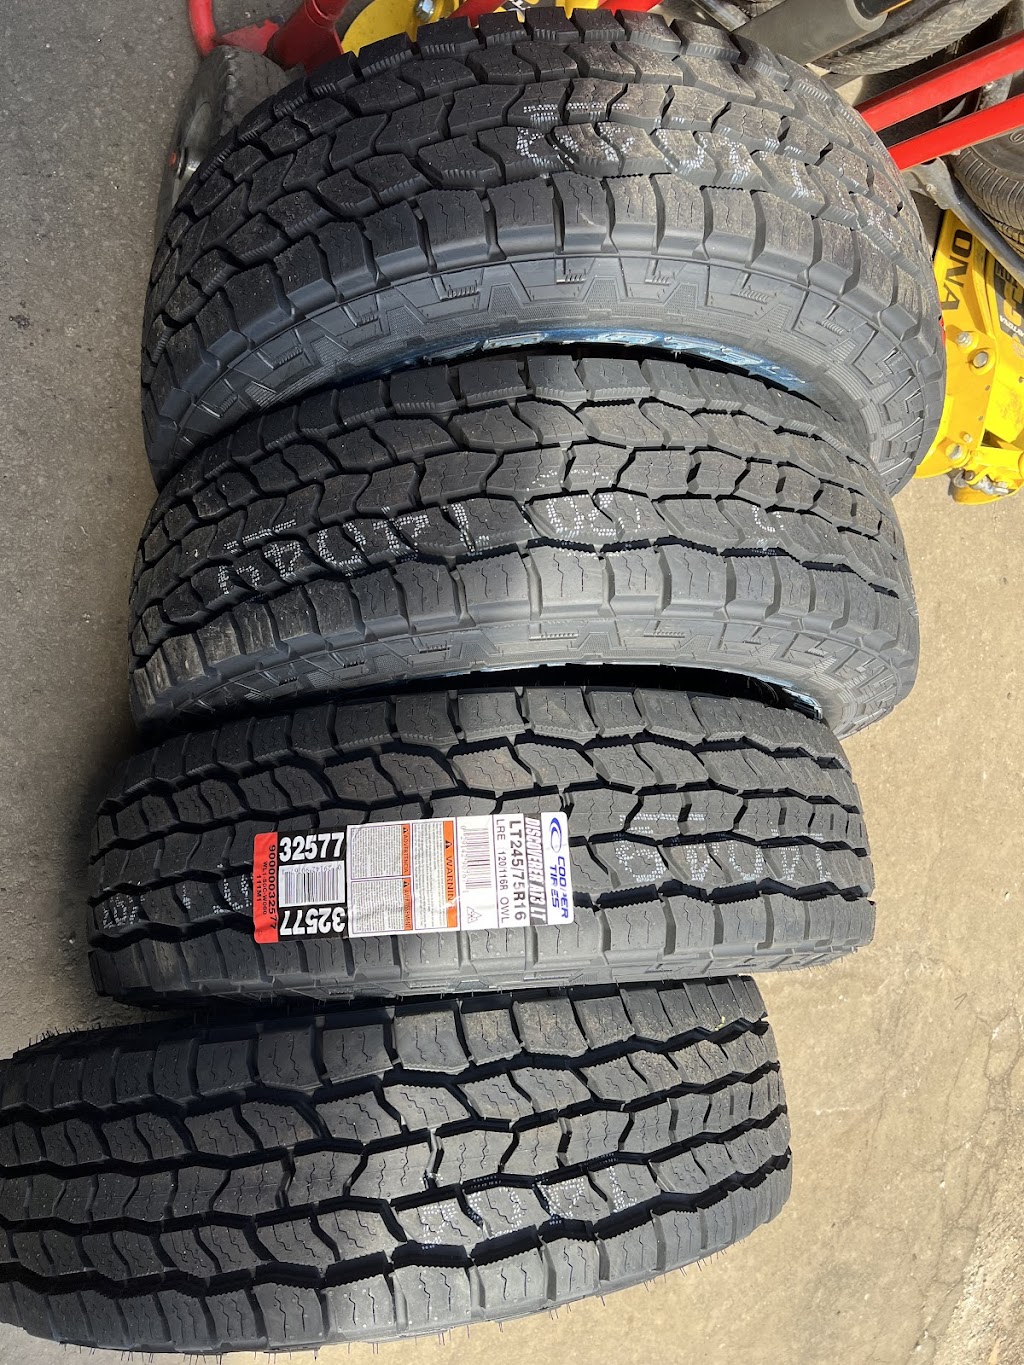 Quality tires llc | Edgemere Rd, New Haven, CT 06512 | Phone: (203) 887-6874